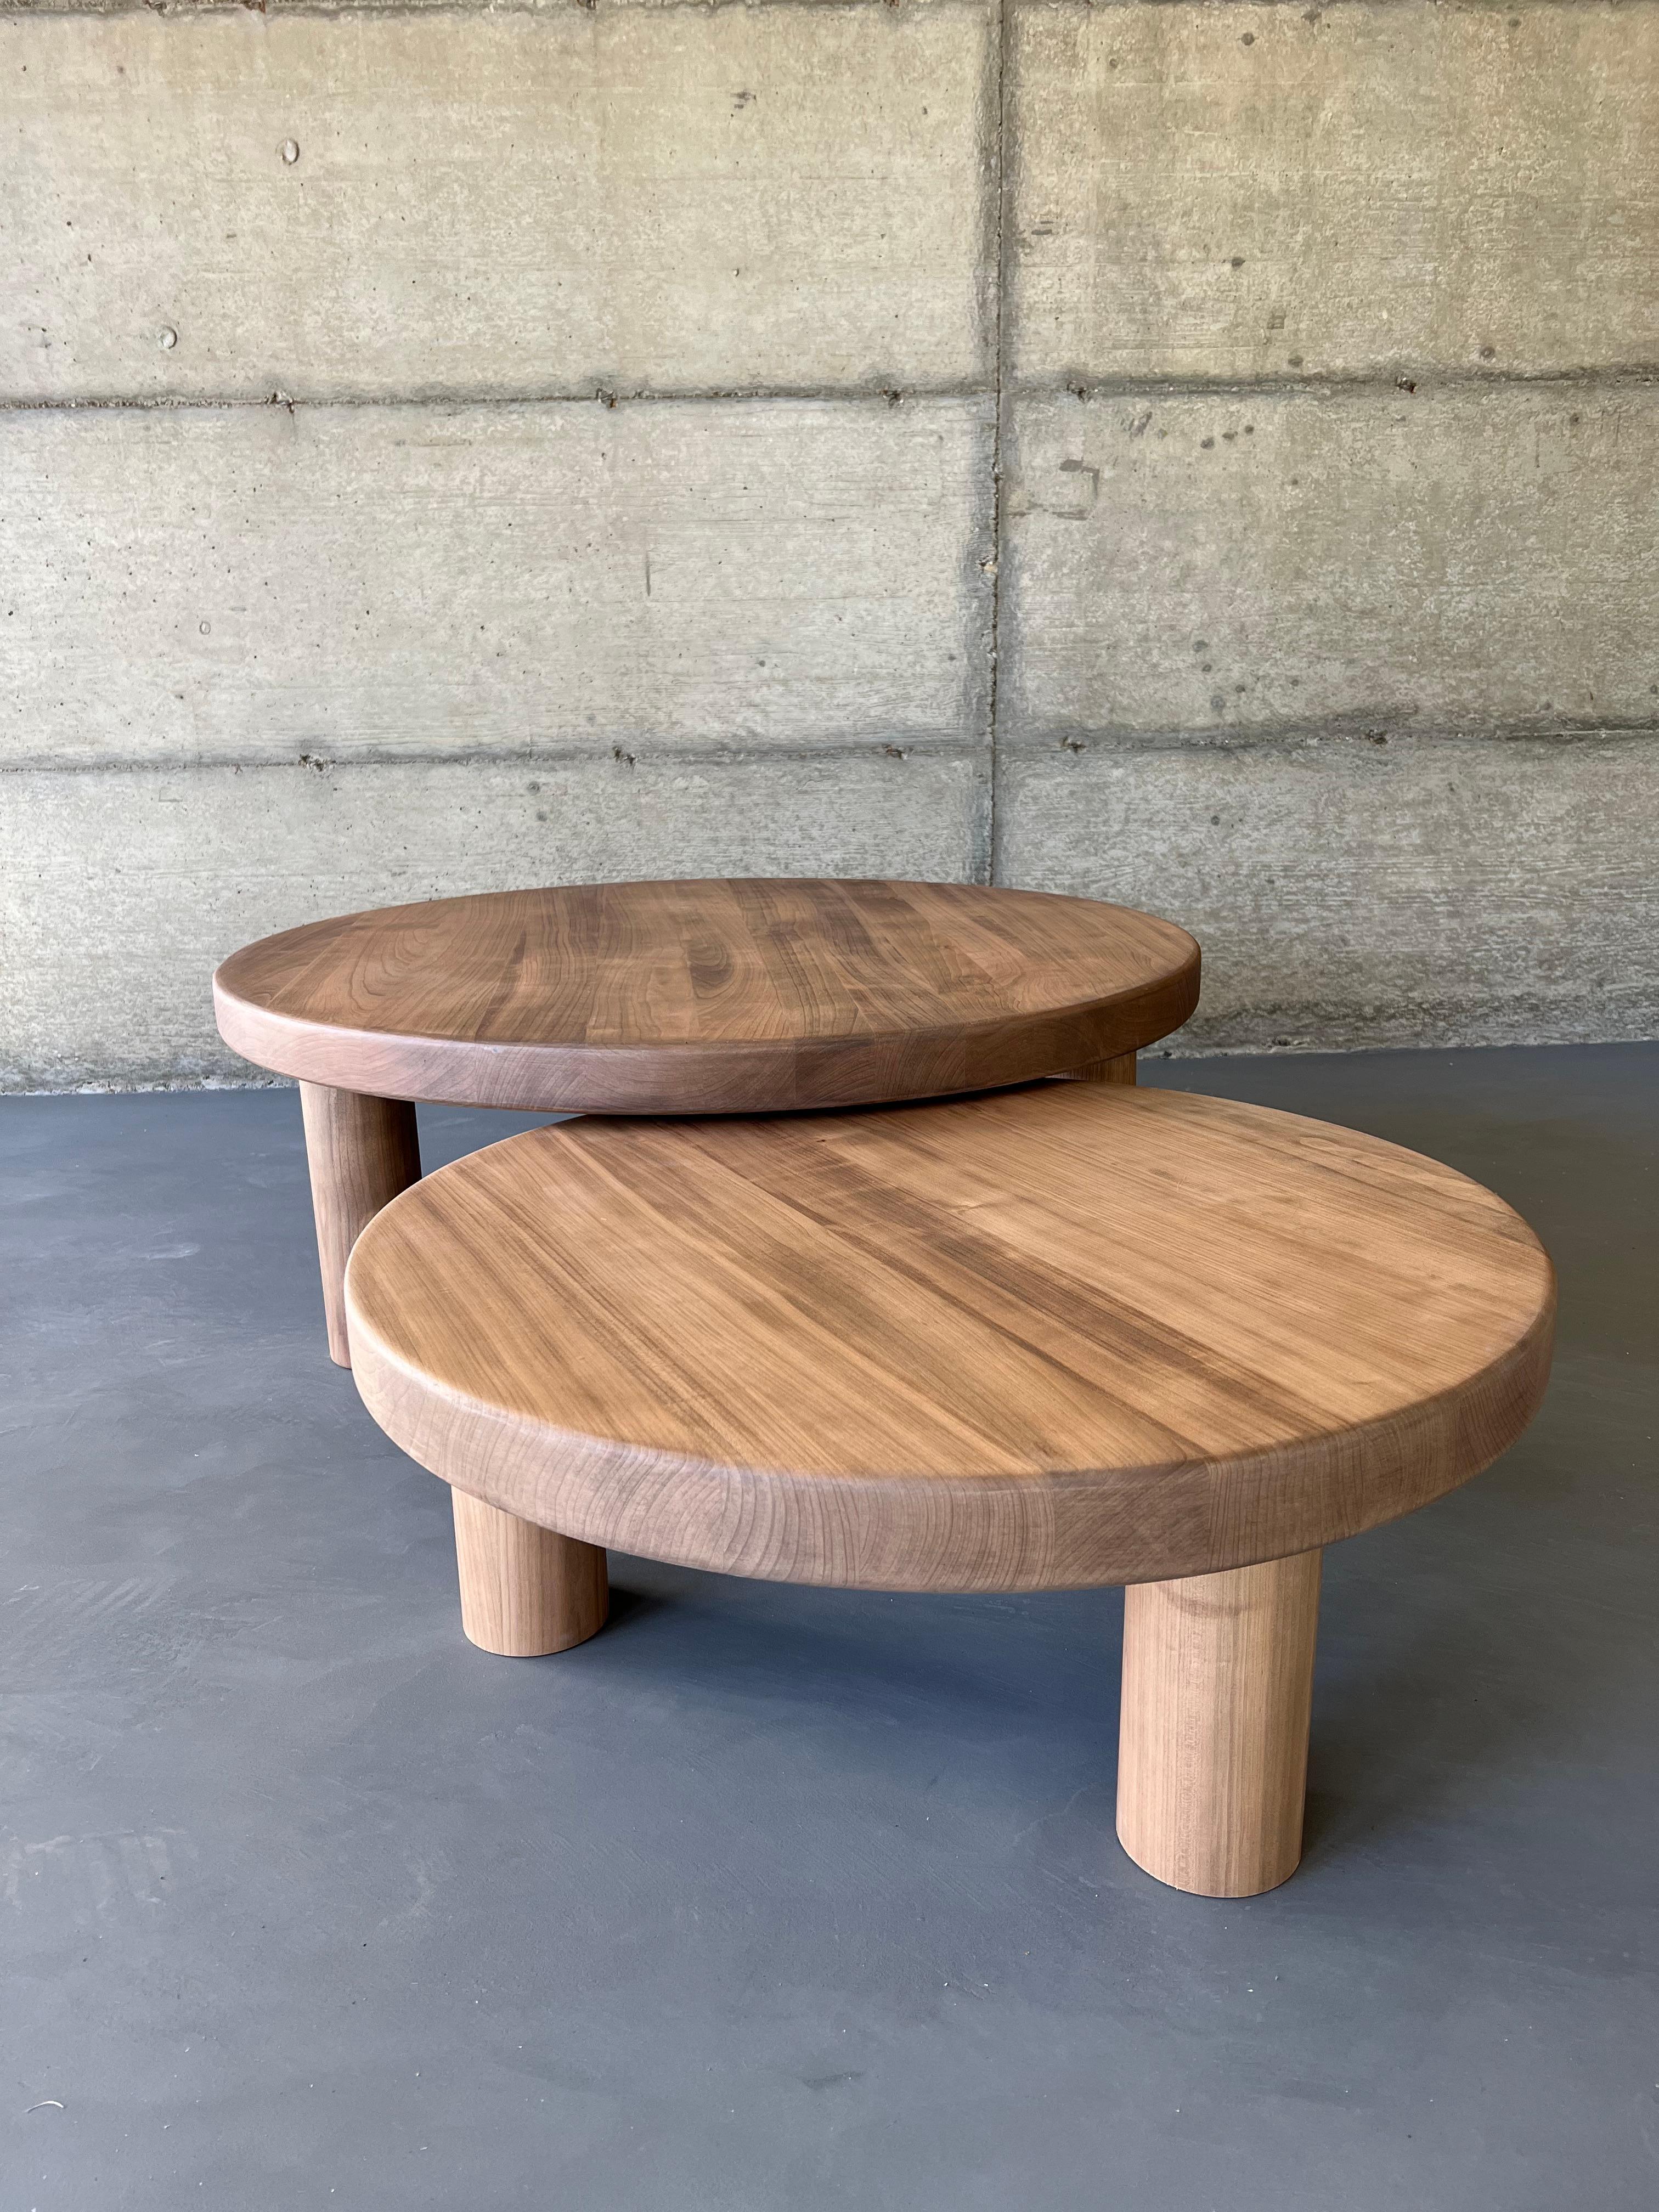 Duo of Mid-Century Style Coffee Tables in Solid Cherry Wood 9